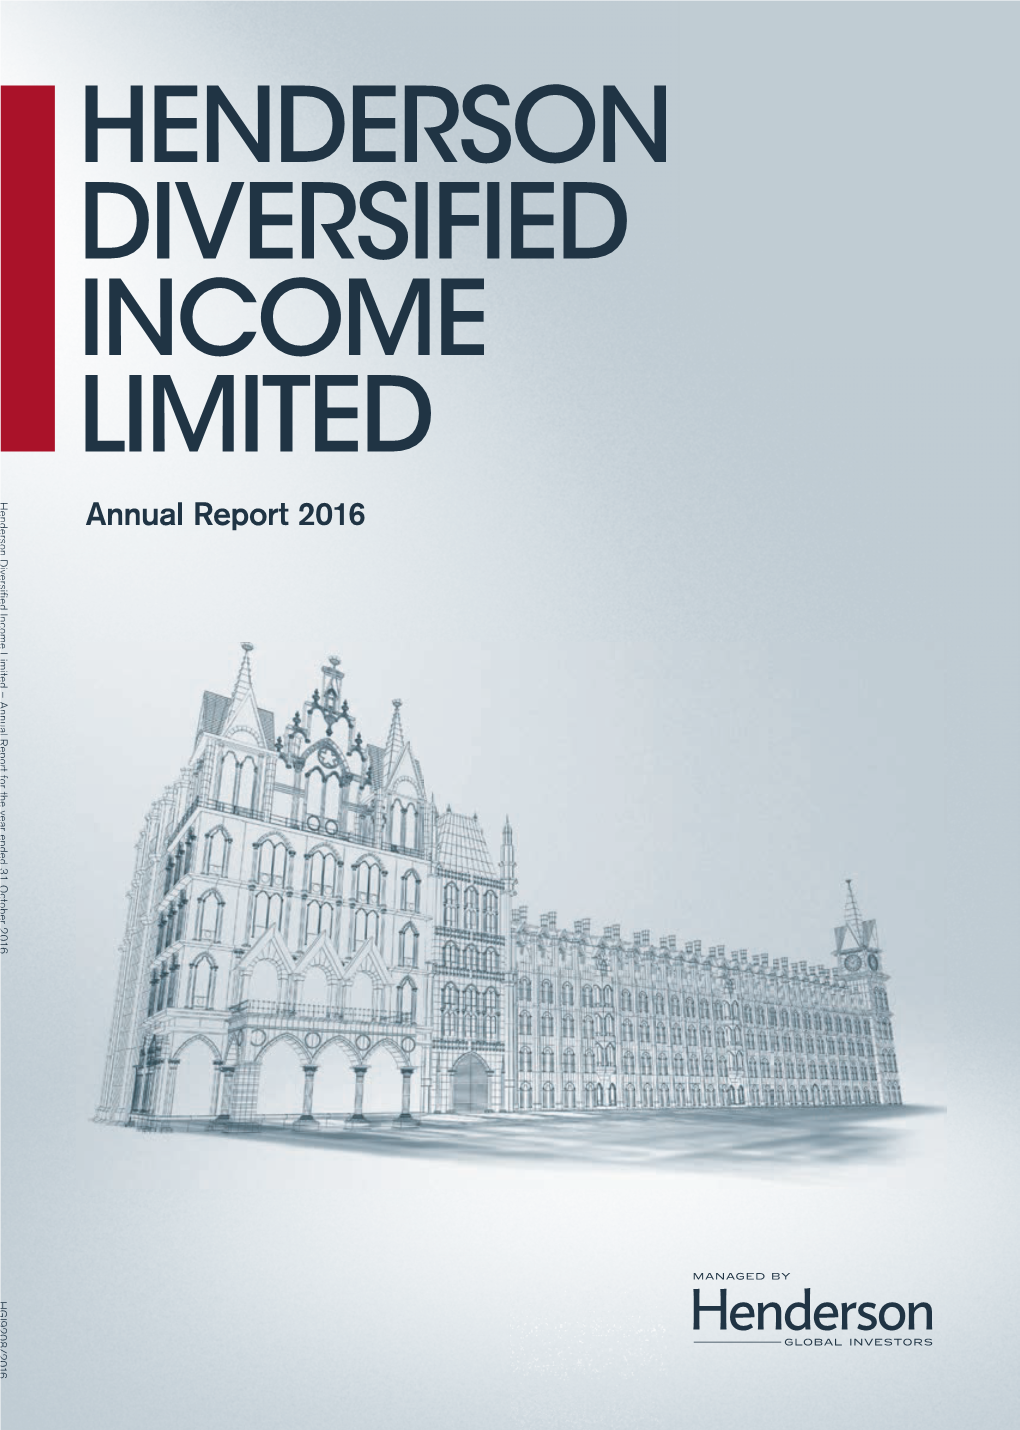 Henderson Diversified Income Limited Annual Report 2016